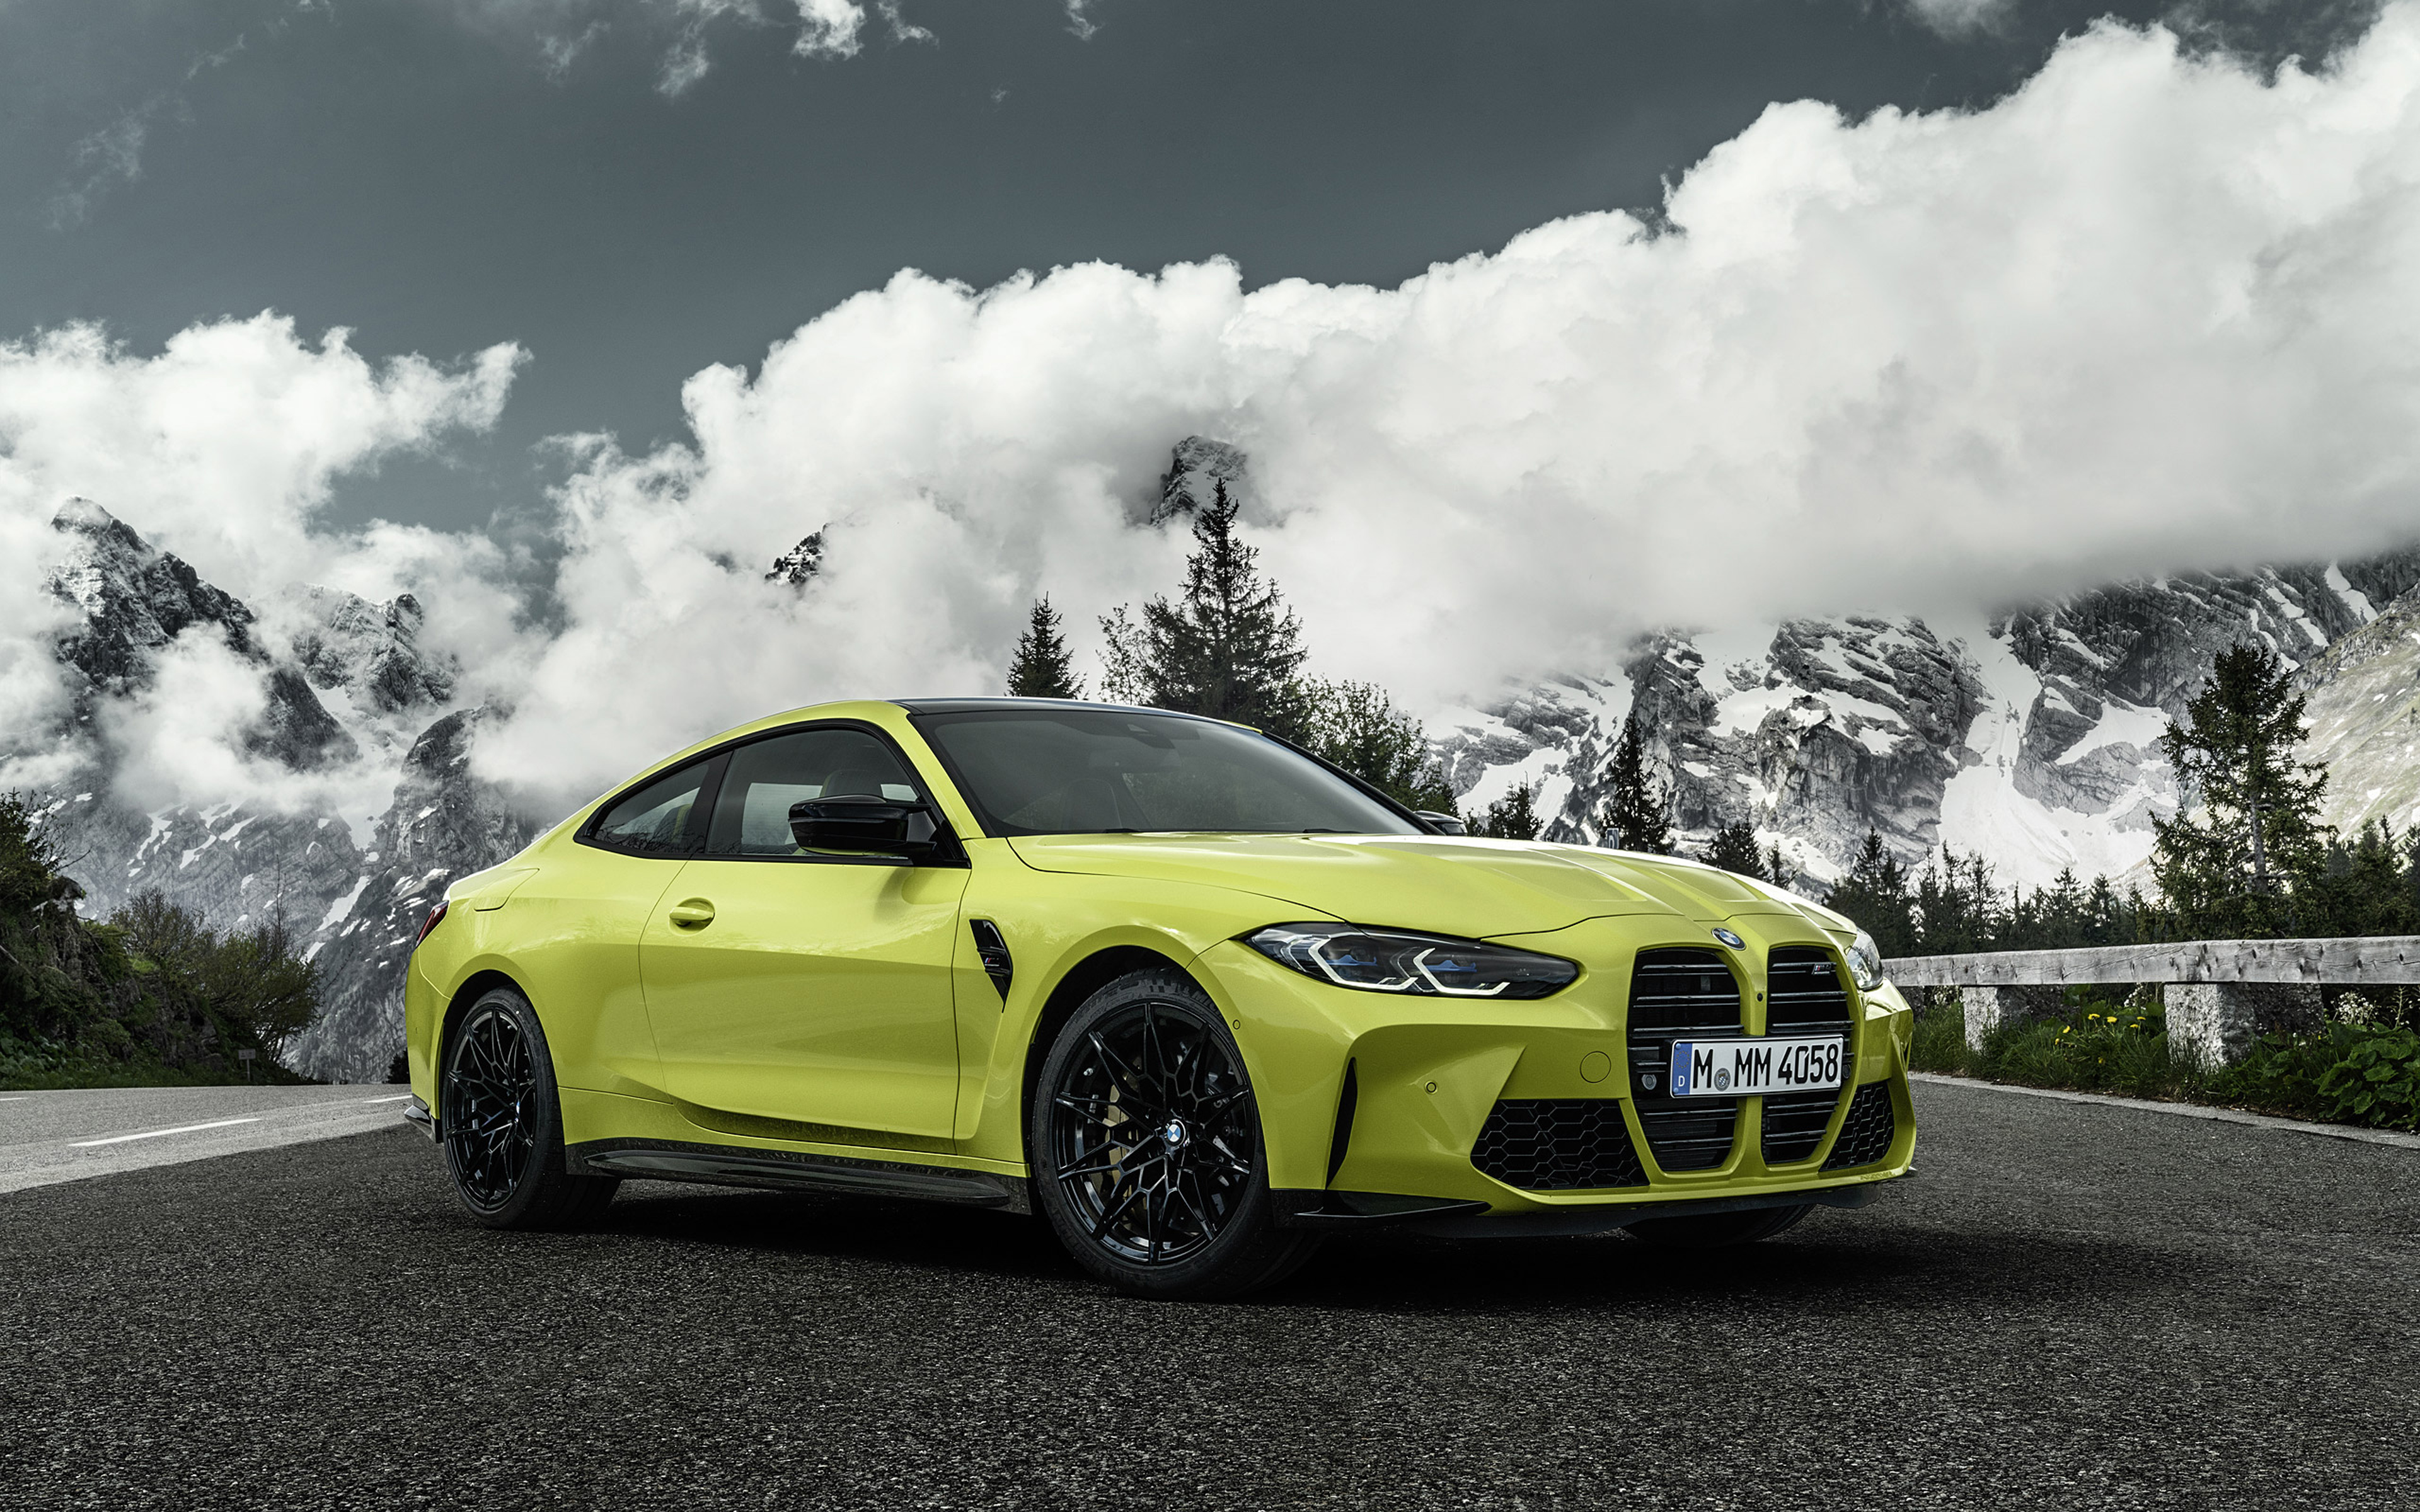 Download wallpaper BMW M4 Competition, G 4k, front view, exterior, yellow coupe, new yellow M German cars, BMW for desktop with resolution 3840x2400. High Quality HD picture wallpaper